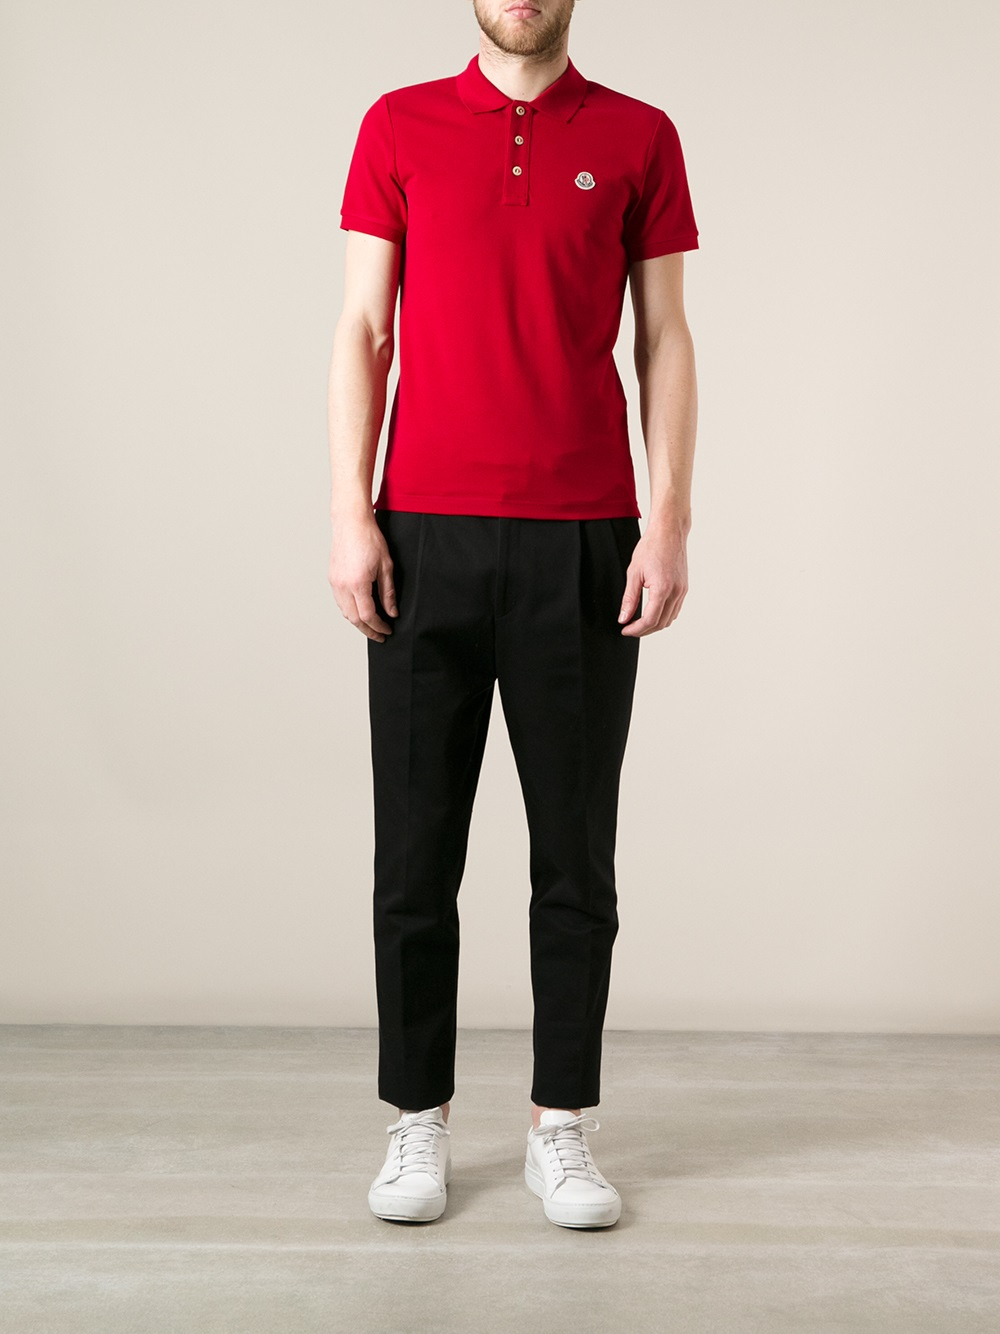 Moncler Polo Shirt in Red for Men - Lyst